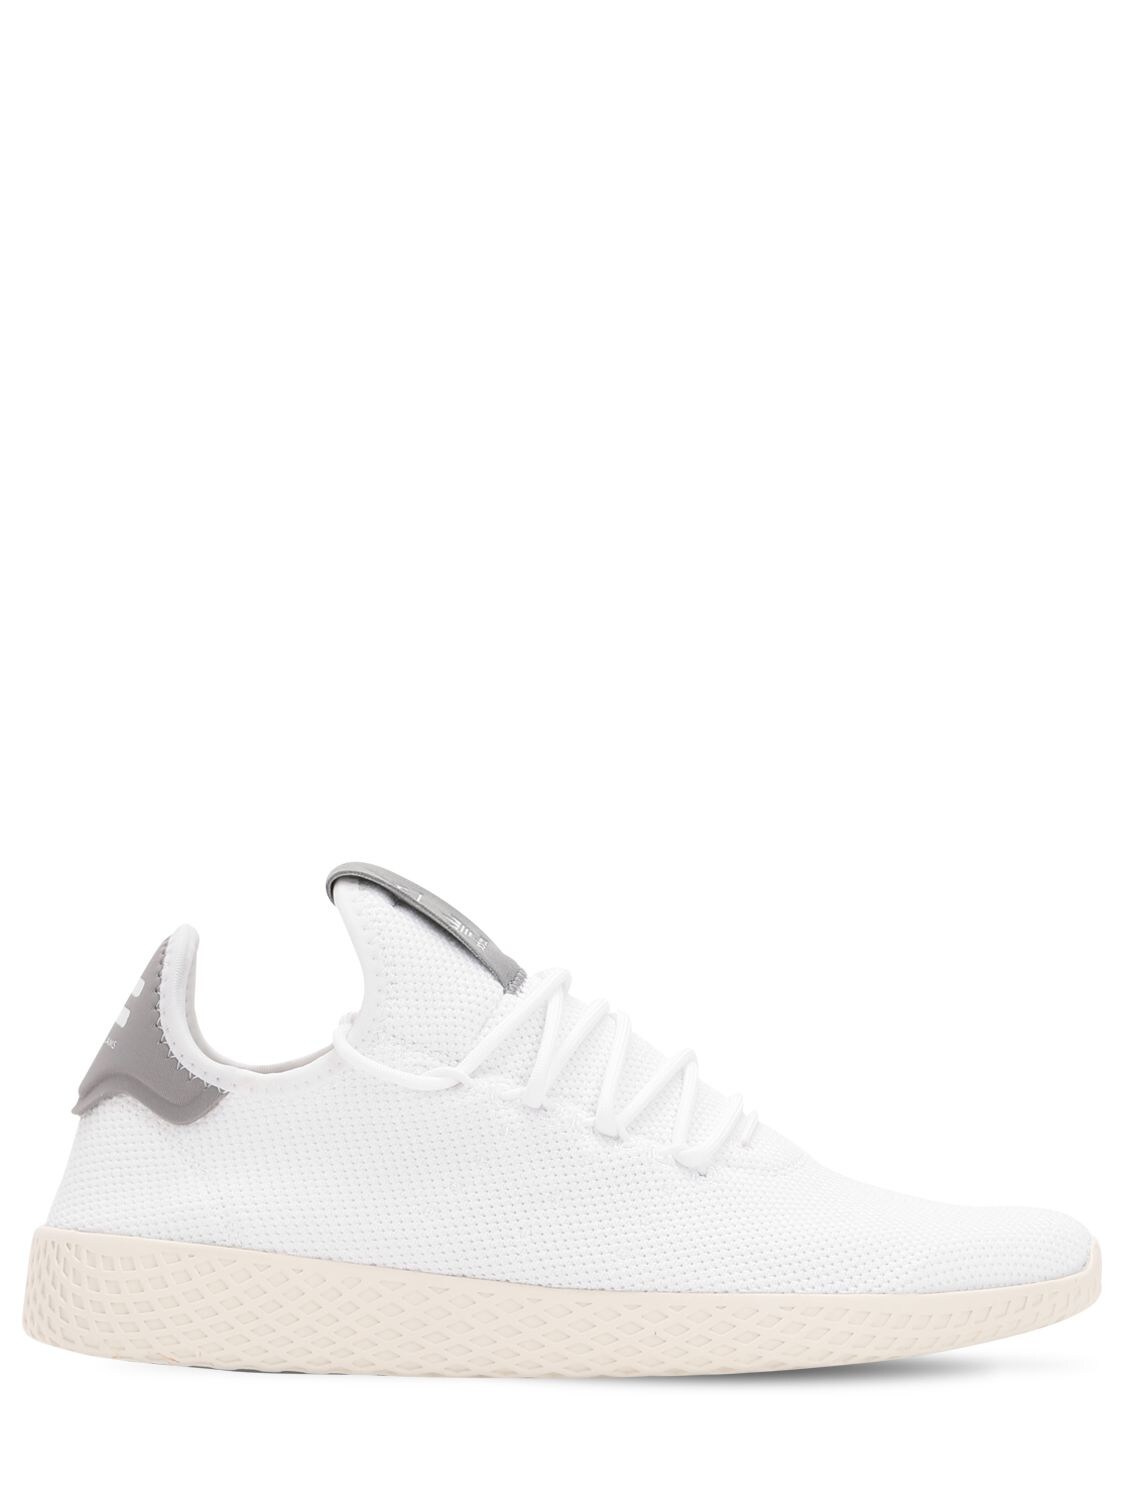 Adidas Originals By Pharrell Williams Pharrell Williams Knit Sneakers In White/grey